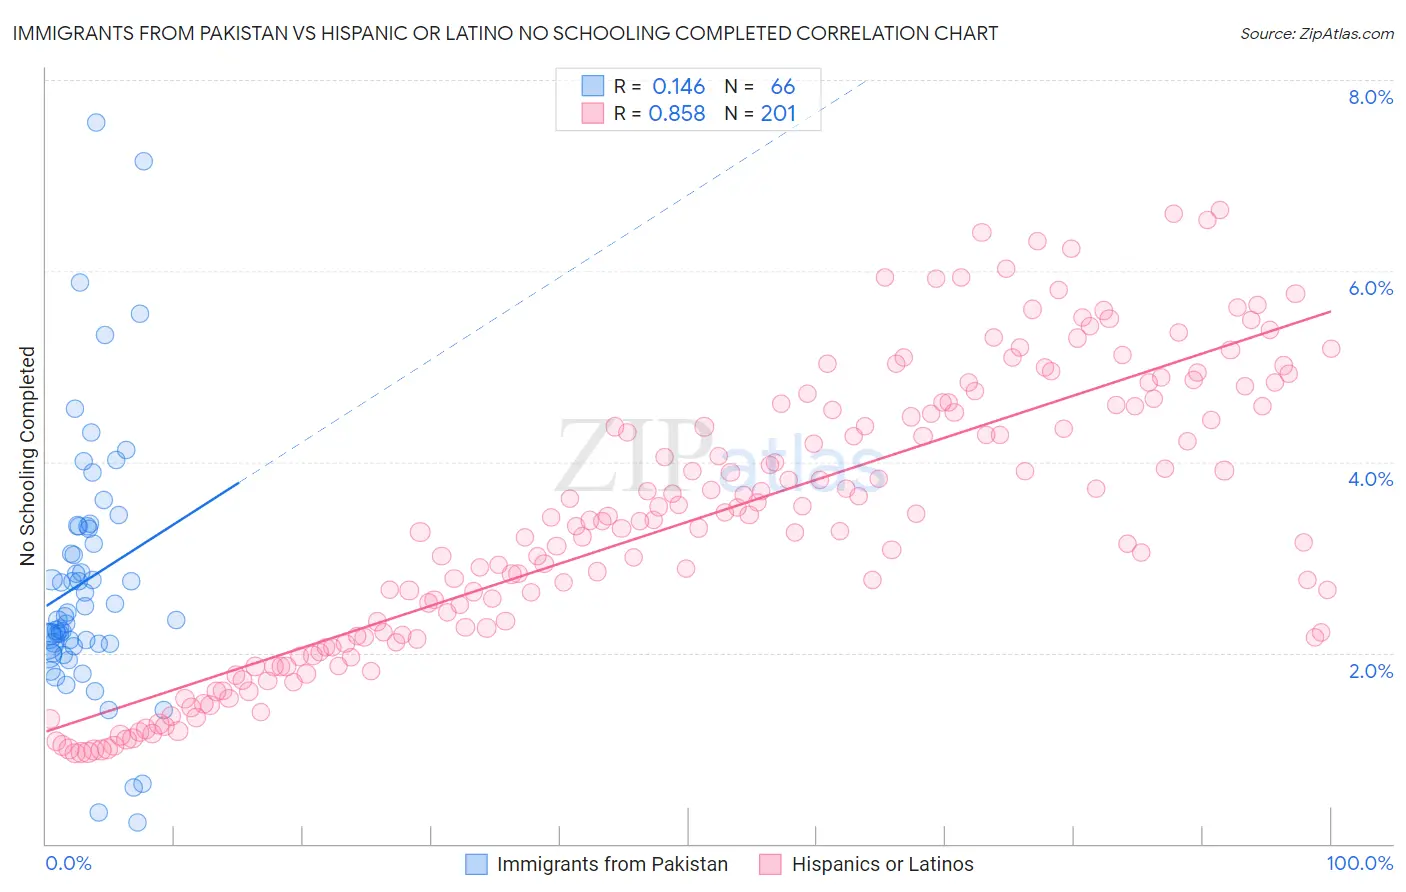 Immigrants from Pakistan vs Hispanic or Latino No Schooling Completed